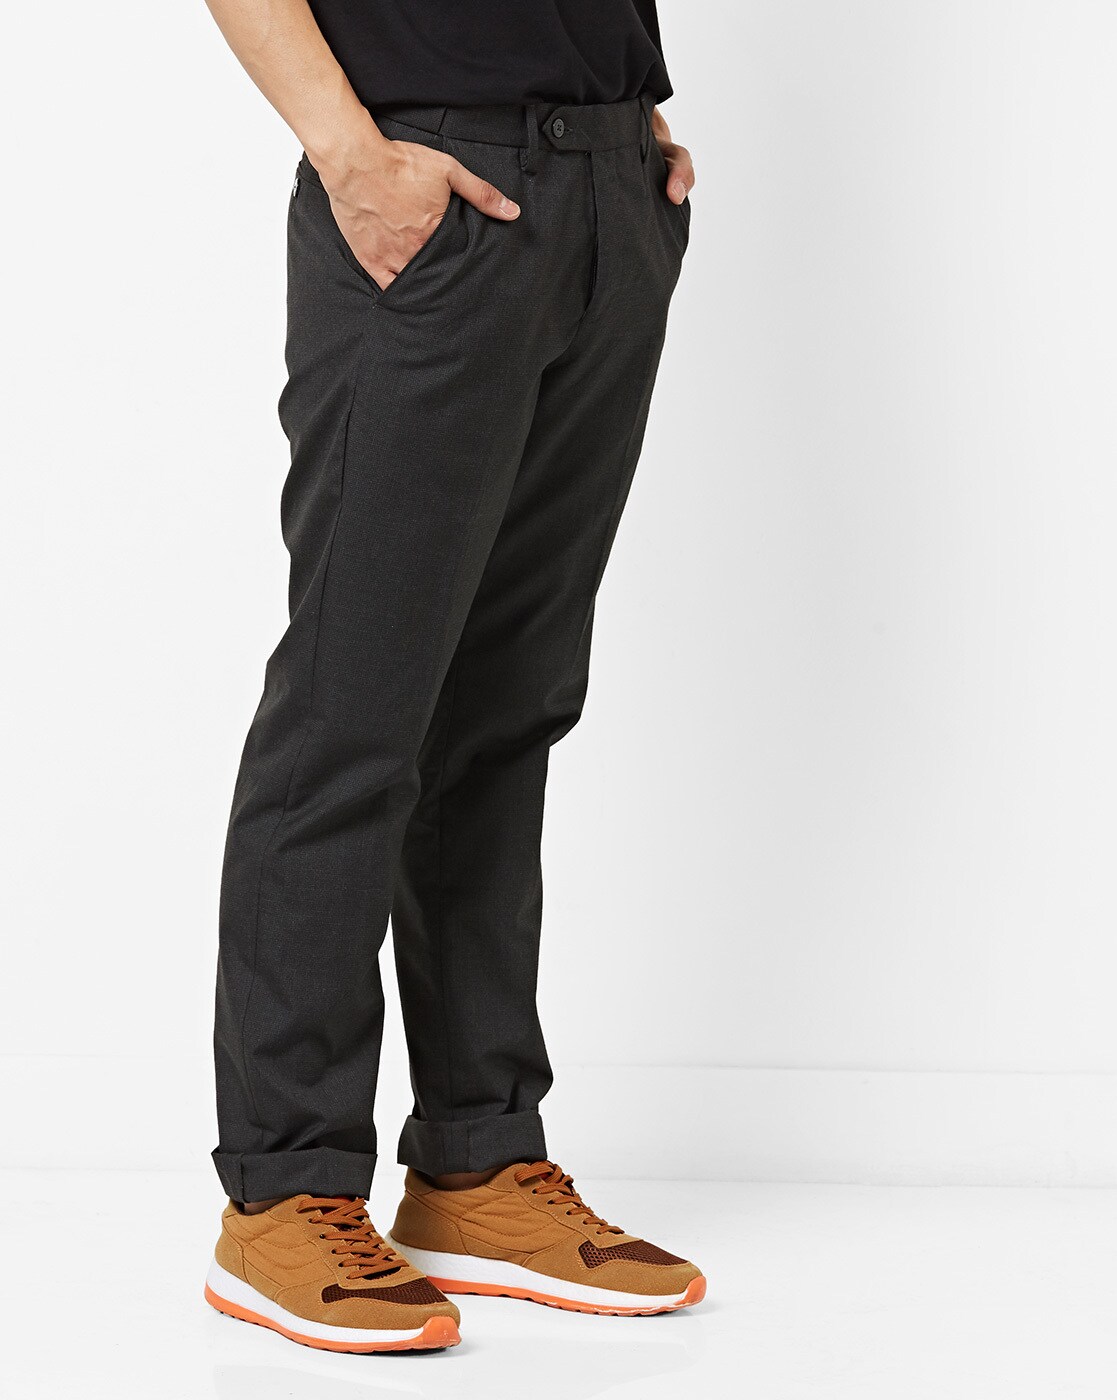 Peter England Casual Trousers  Buy Peter England Men Beige Solid Carrot  Fit Casual Trousers Online  Nykaa Fashion